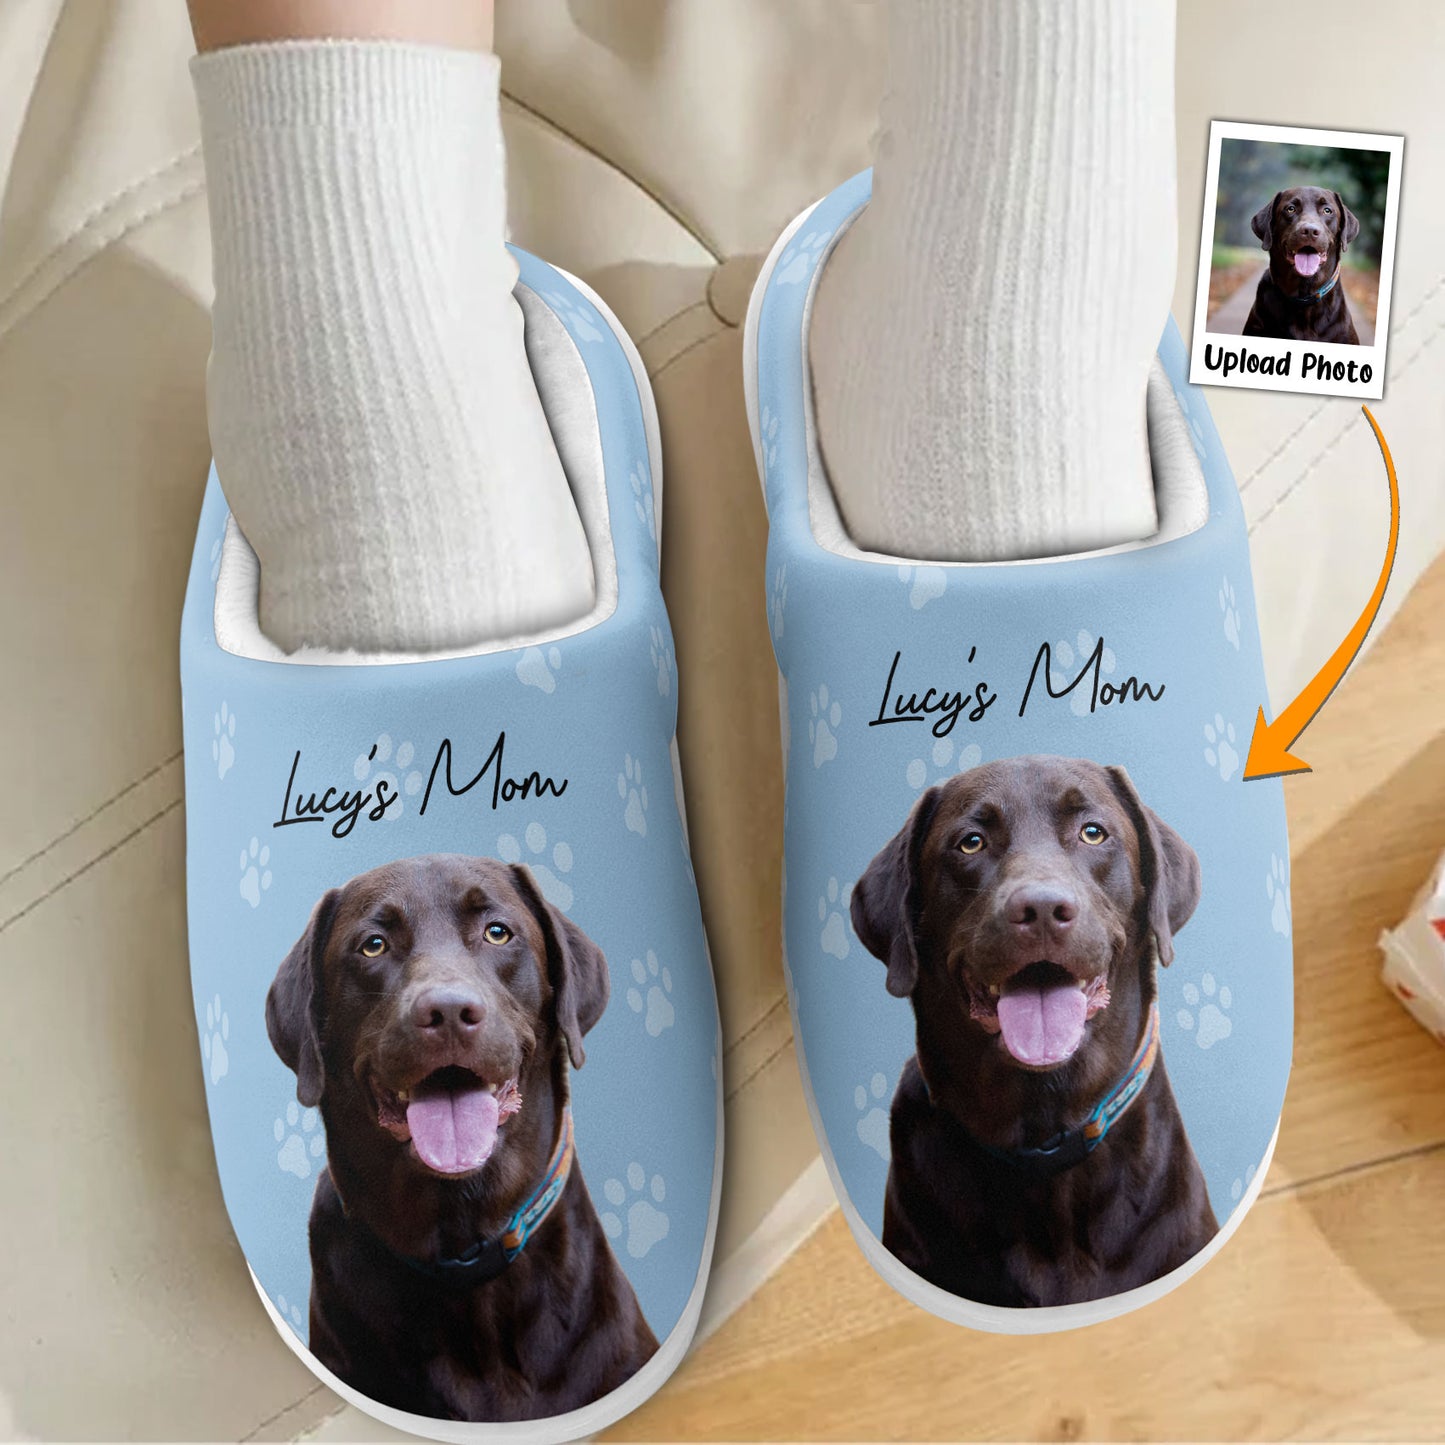 Custom Pet Photo Gift For Dog Lovers - Personalized Photo Slippers